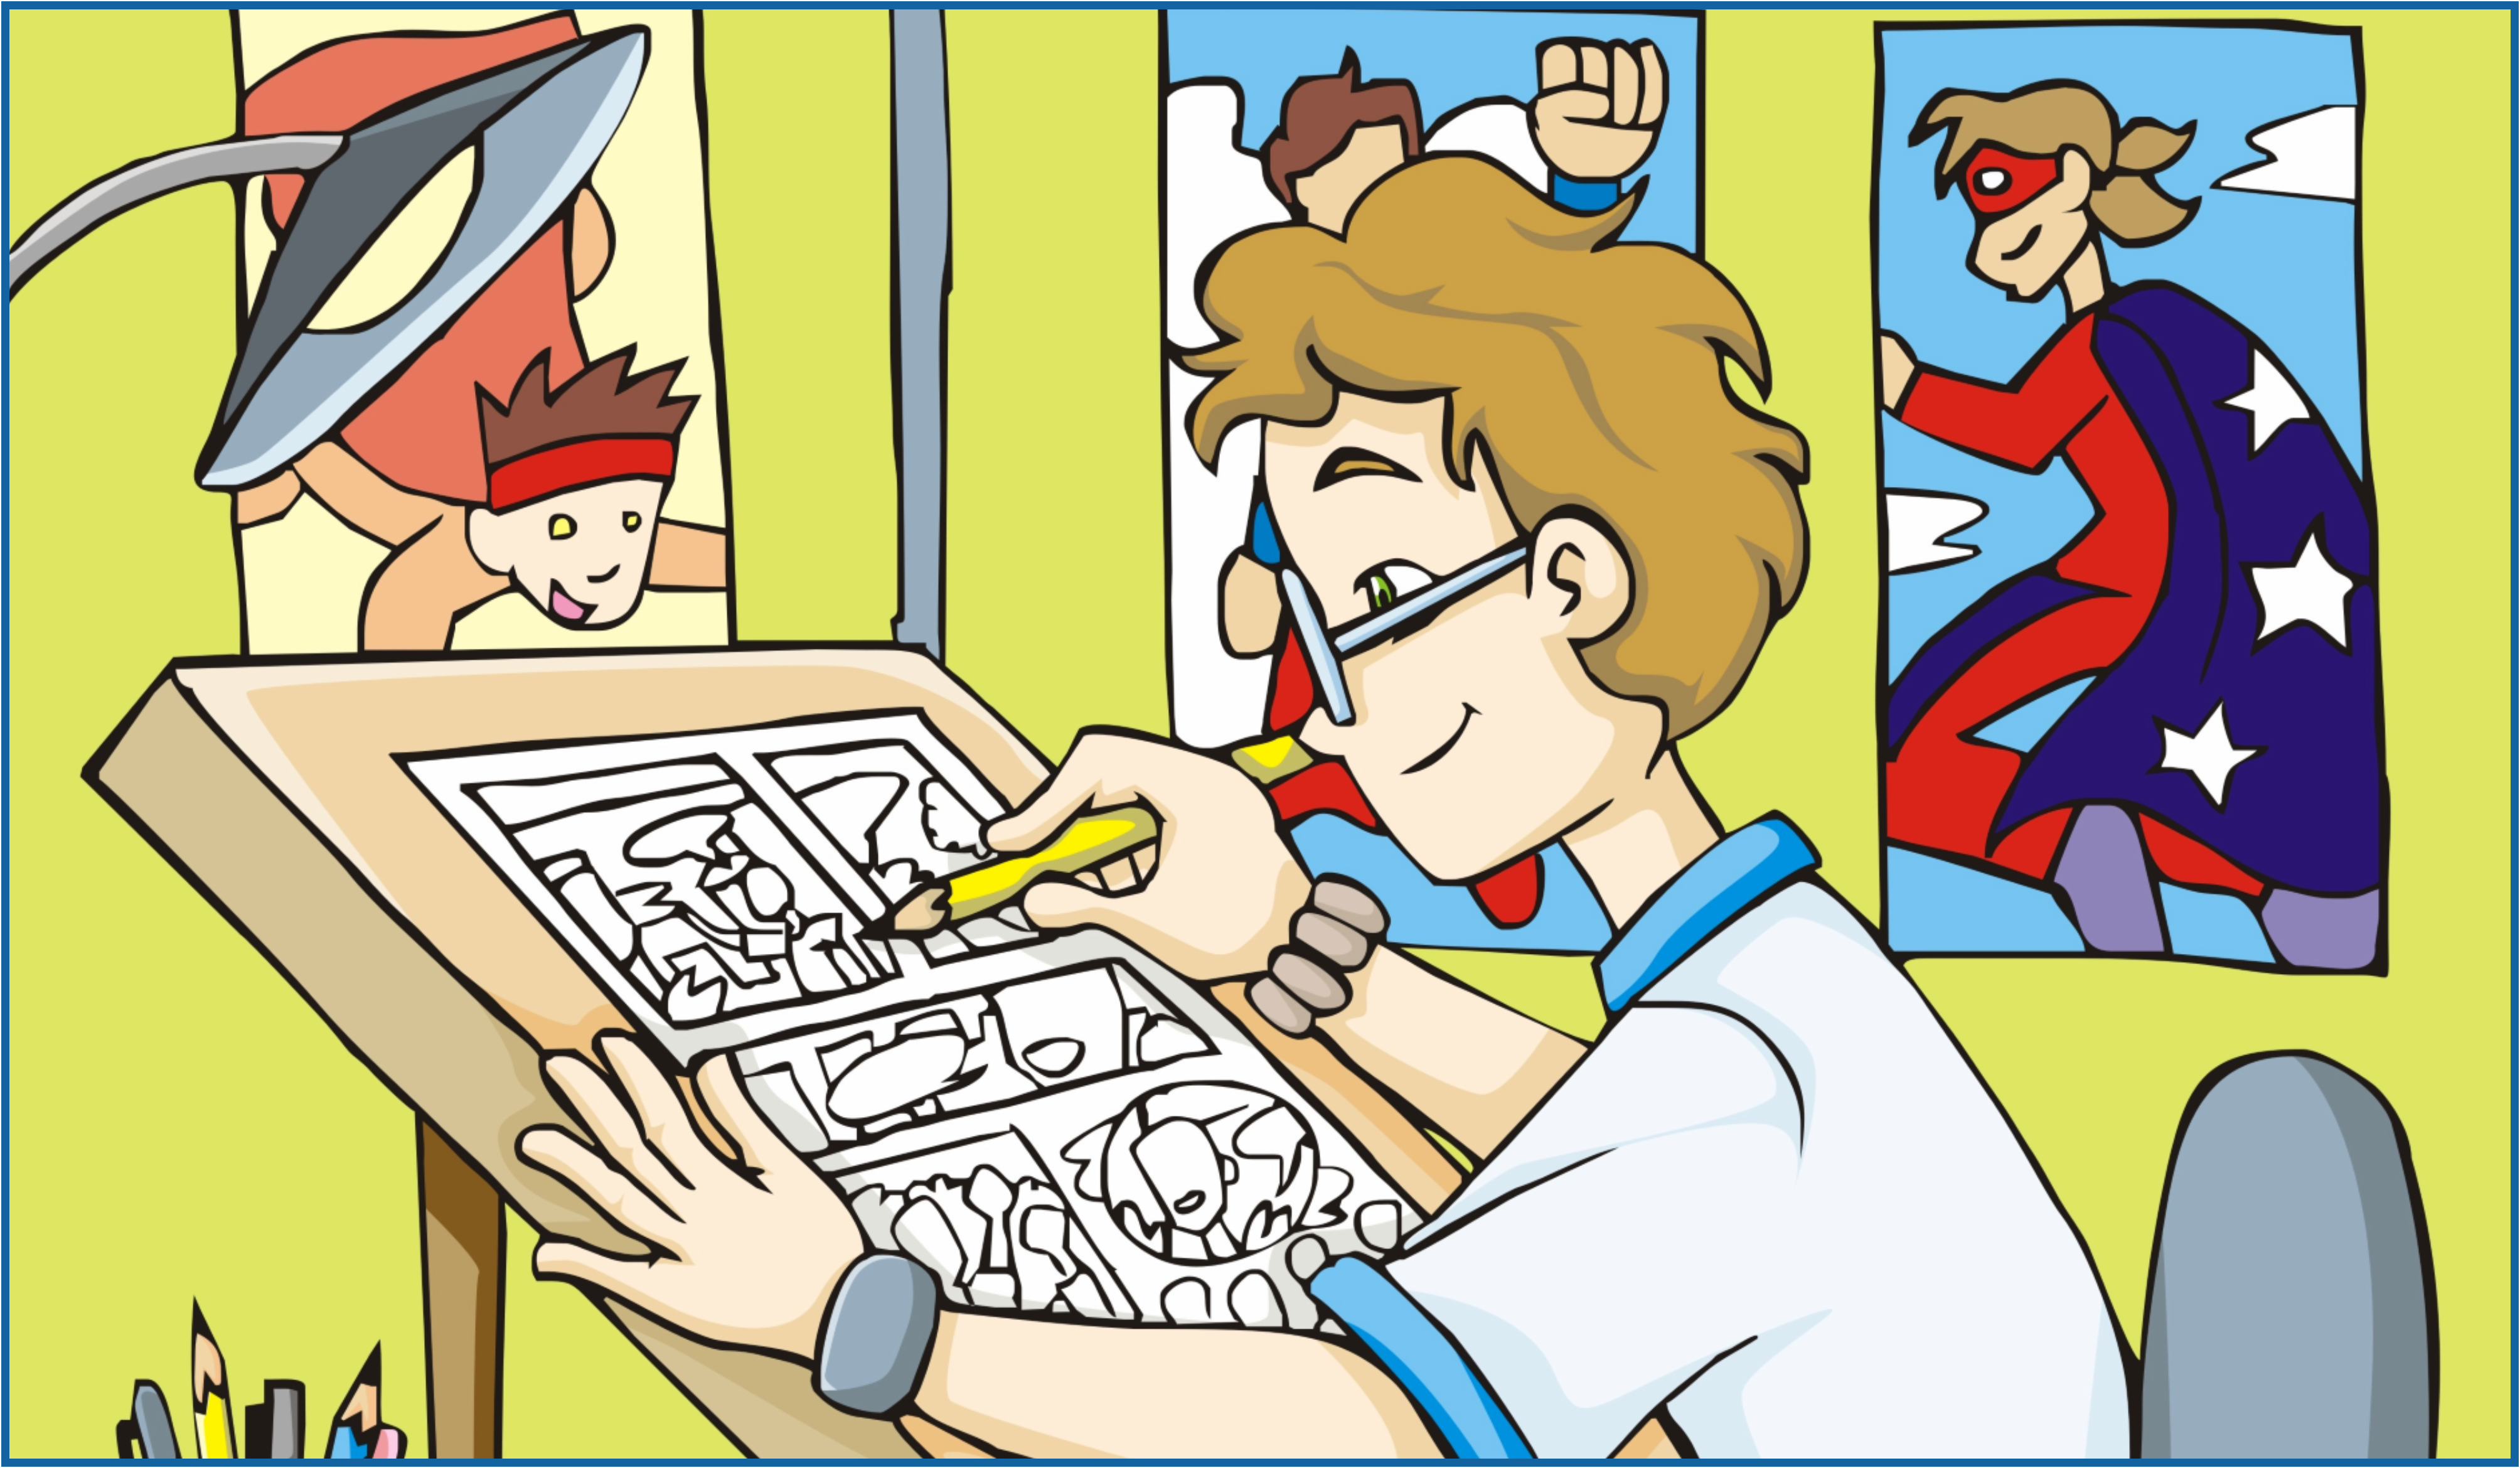 The Art of Cartooning - TV Cartoon Characters | San Diego Public Library